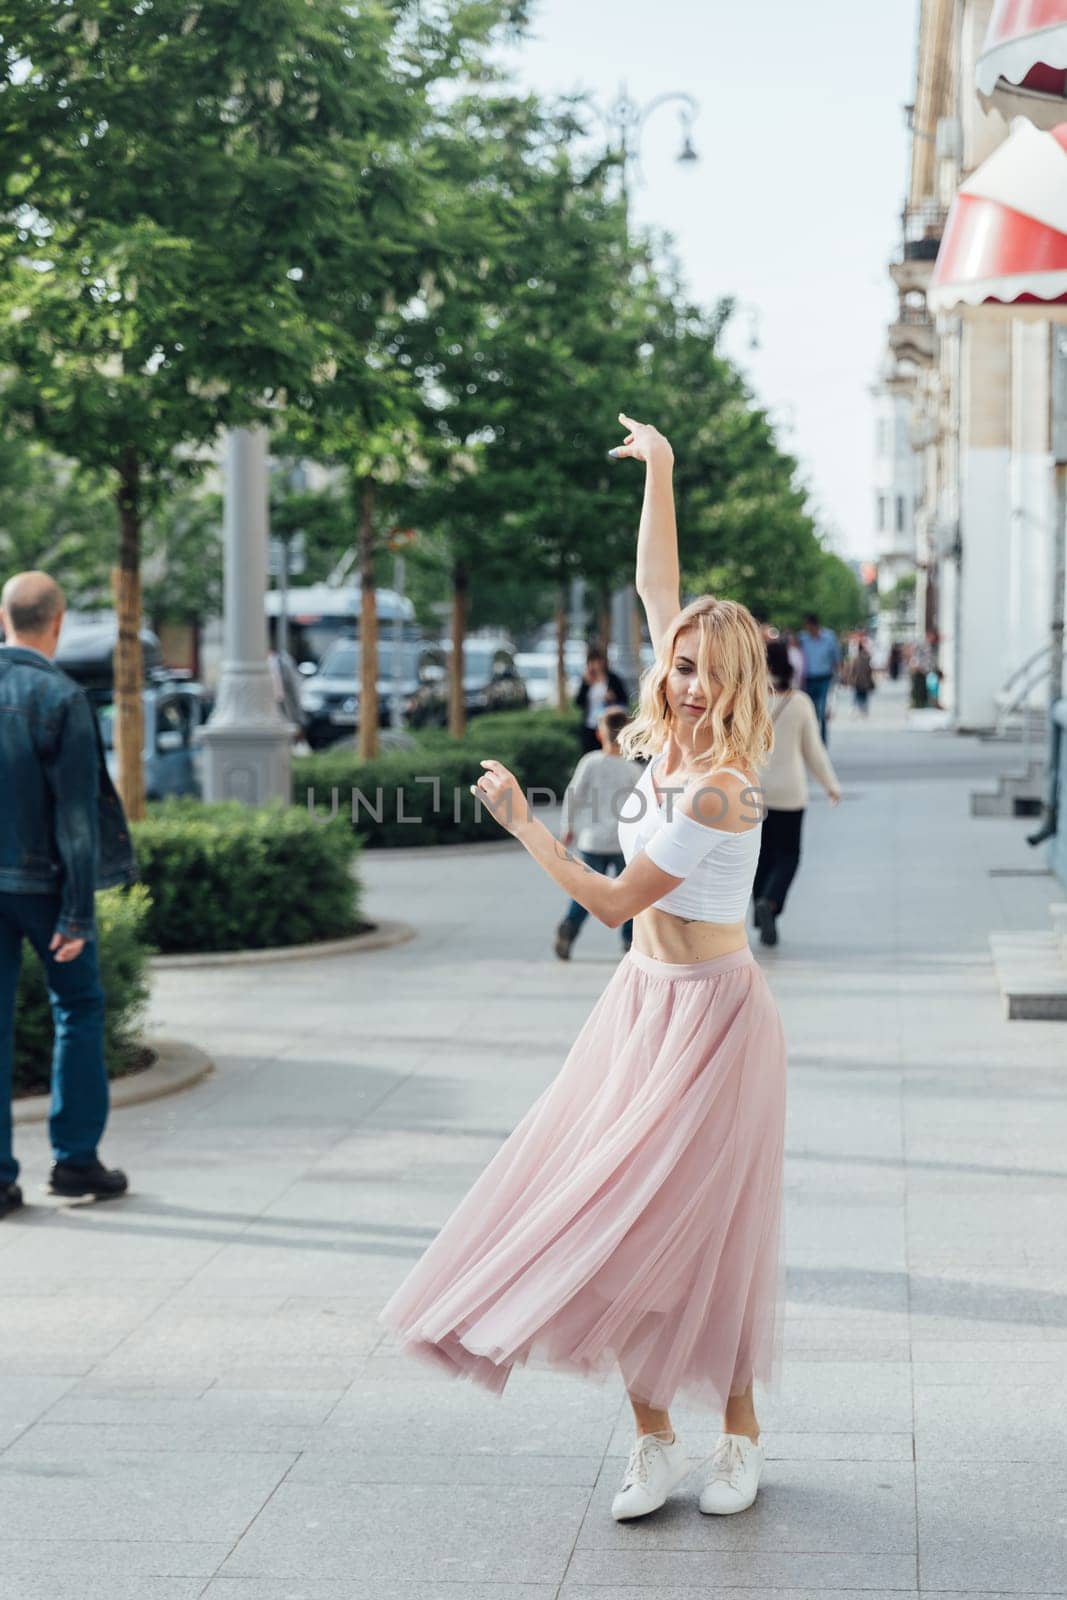 blonde dancing on the street